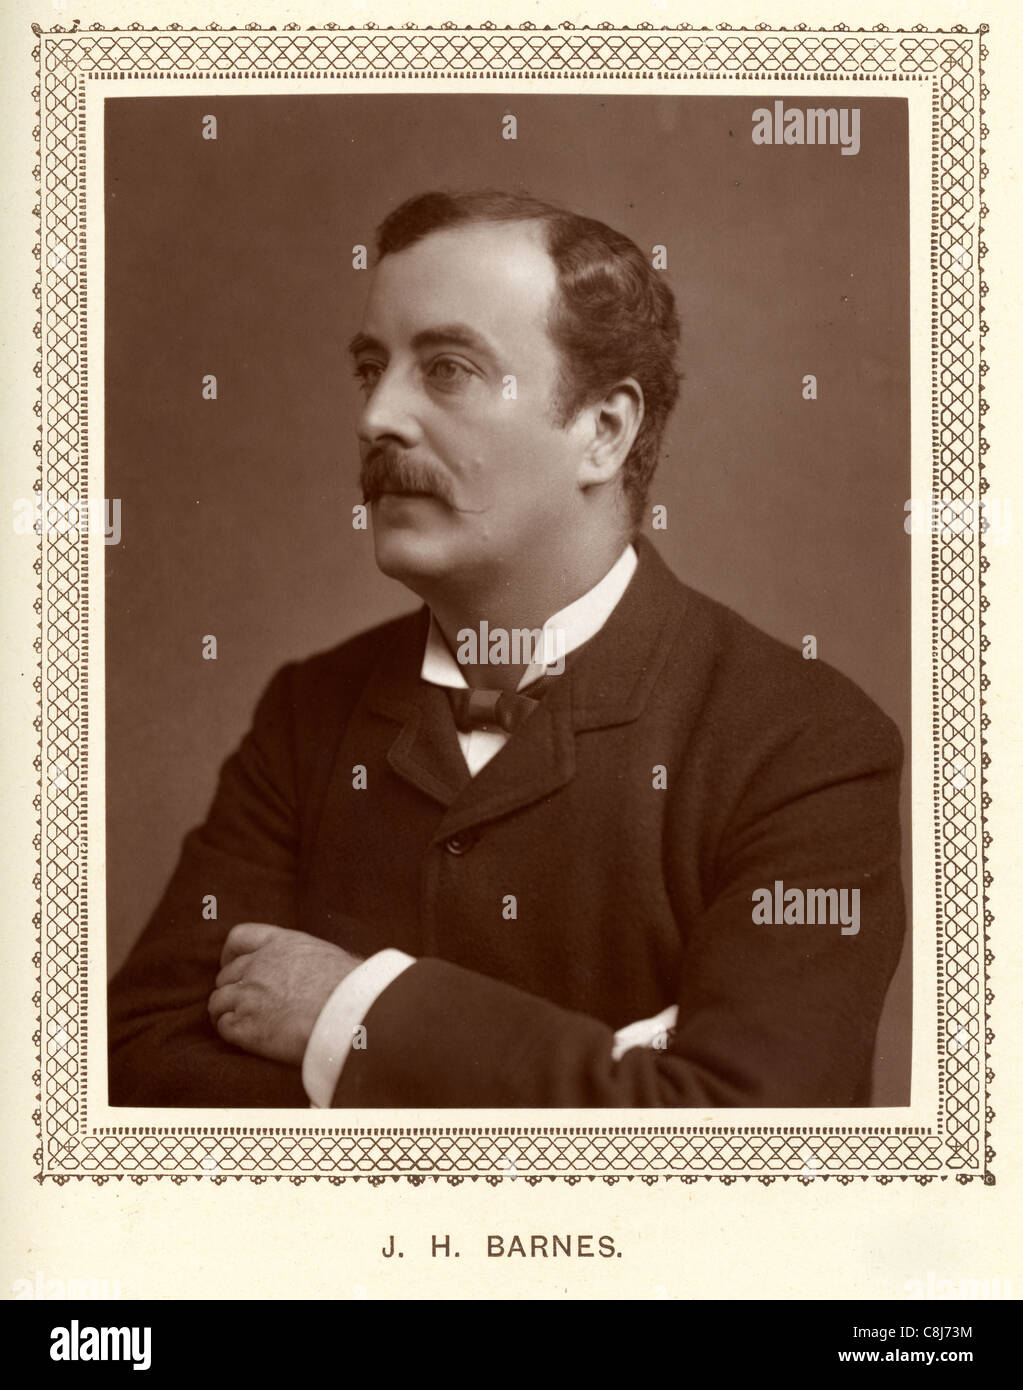 Vintage photograph of J H Barnes an English actor from 1883 Stock Photo